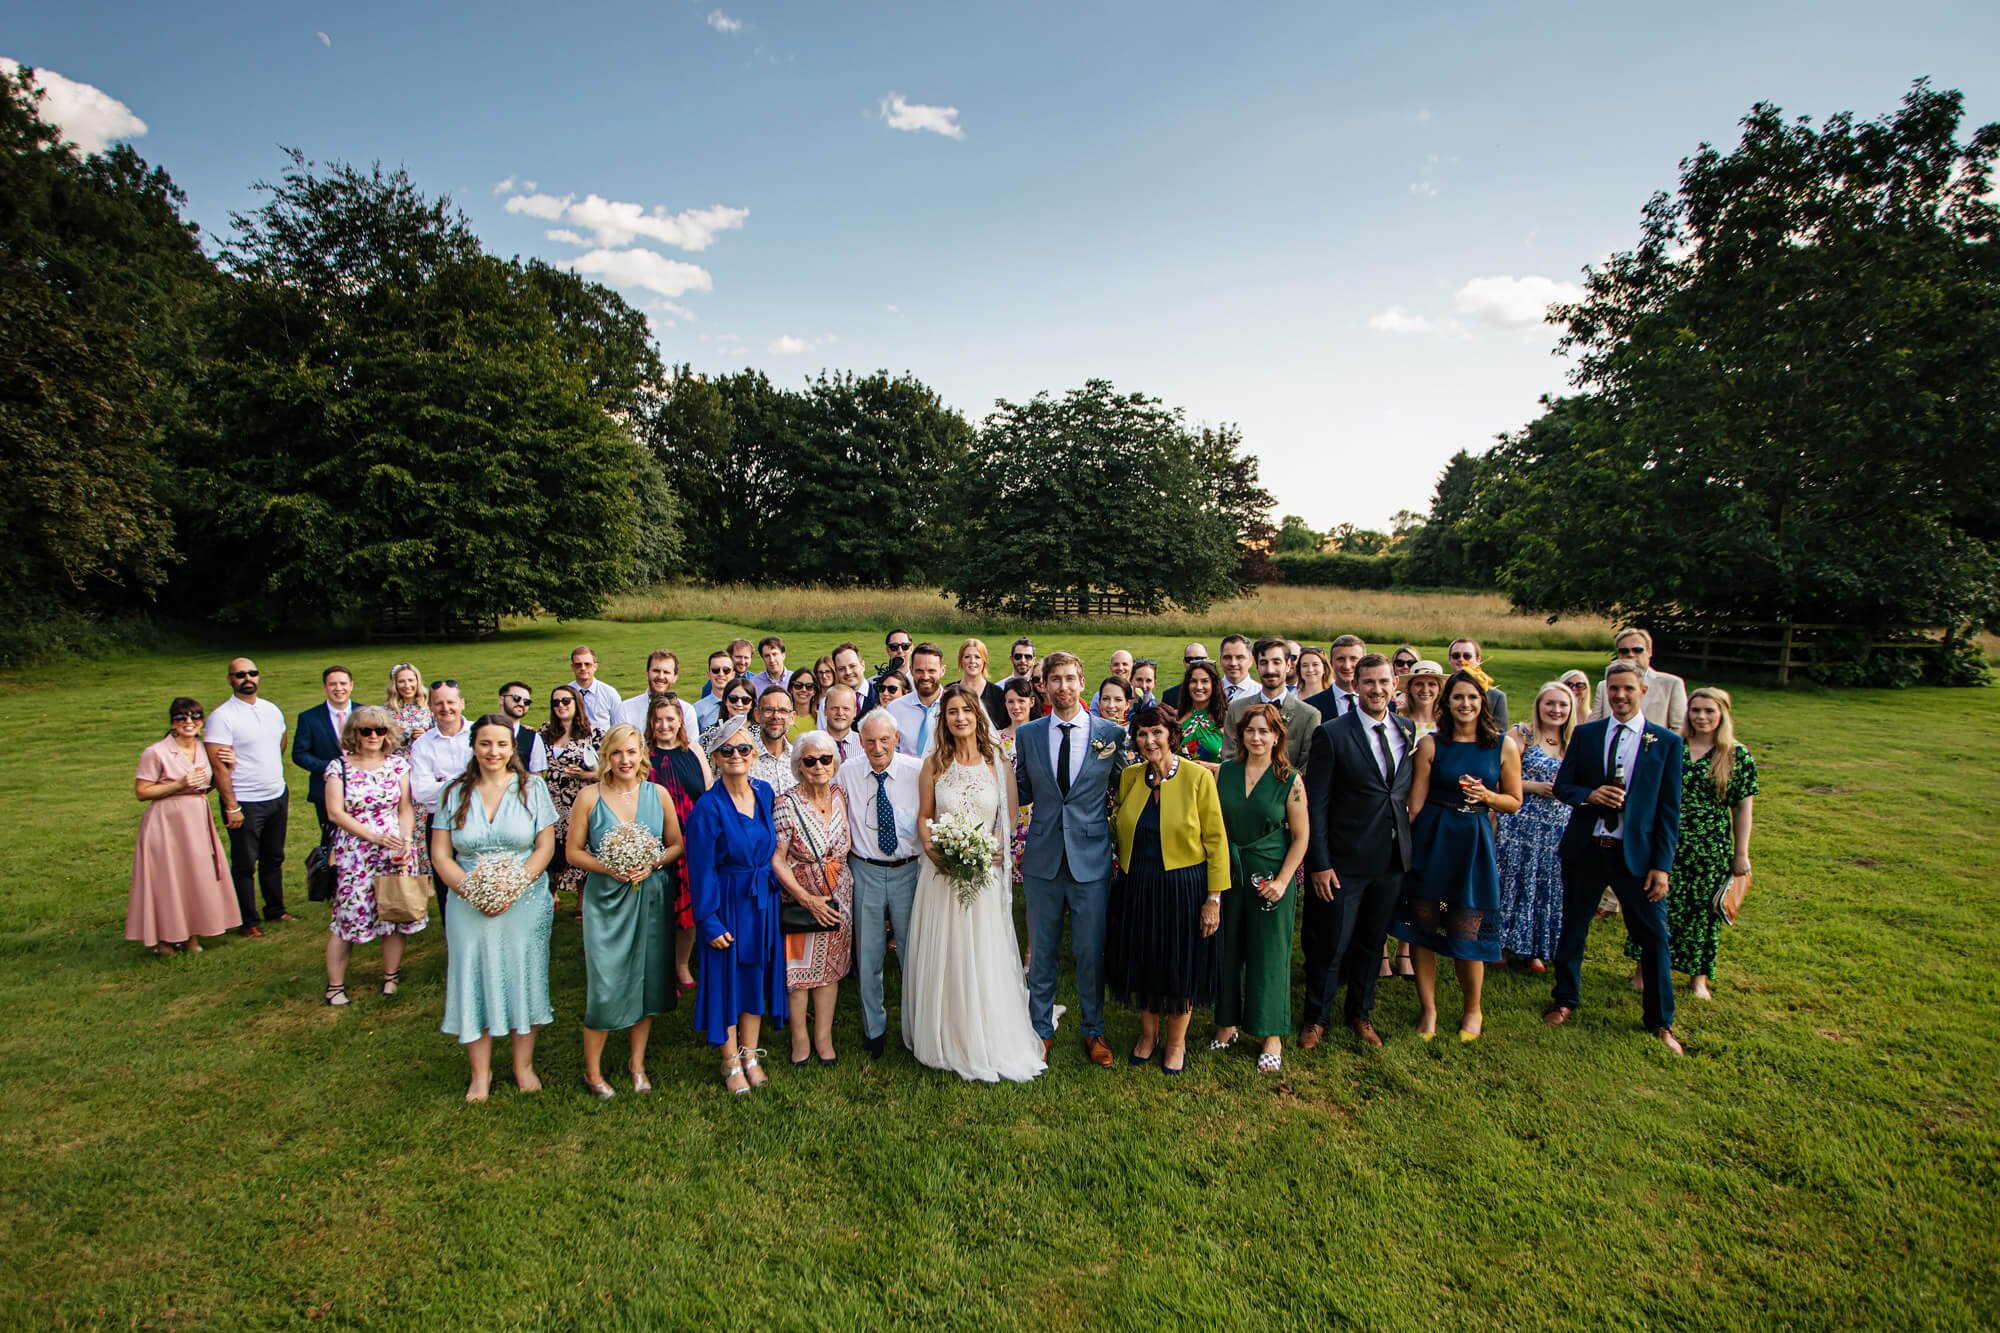 A group shot of all the wedding guests at Crayke Manor